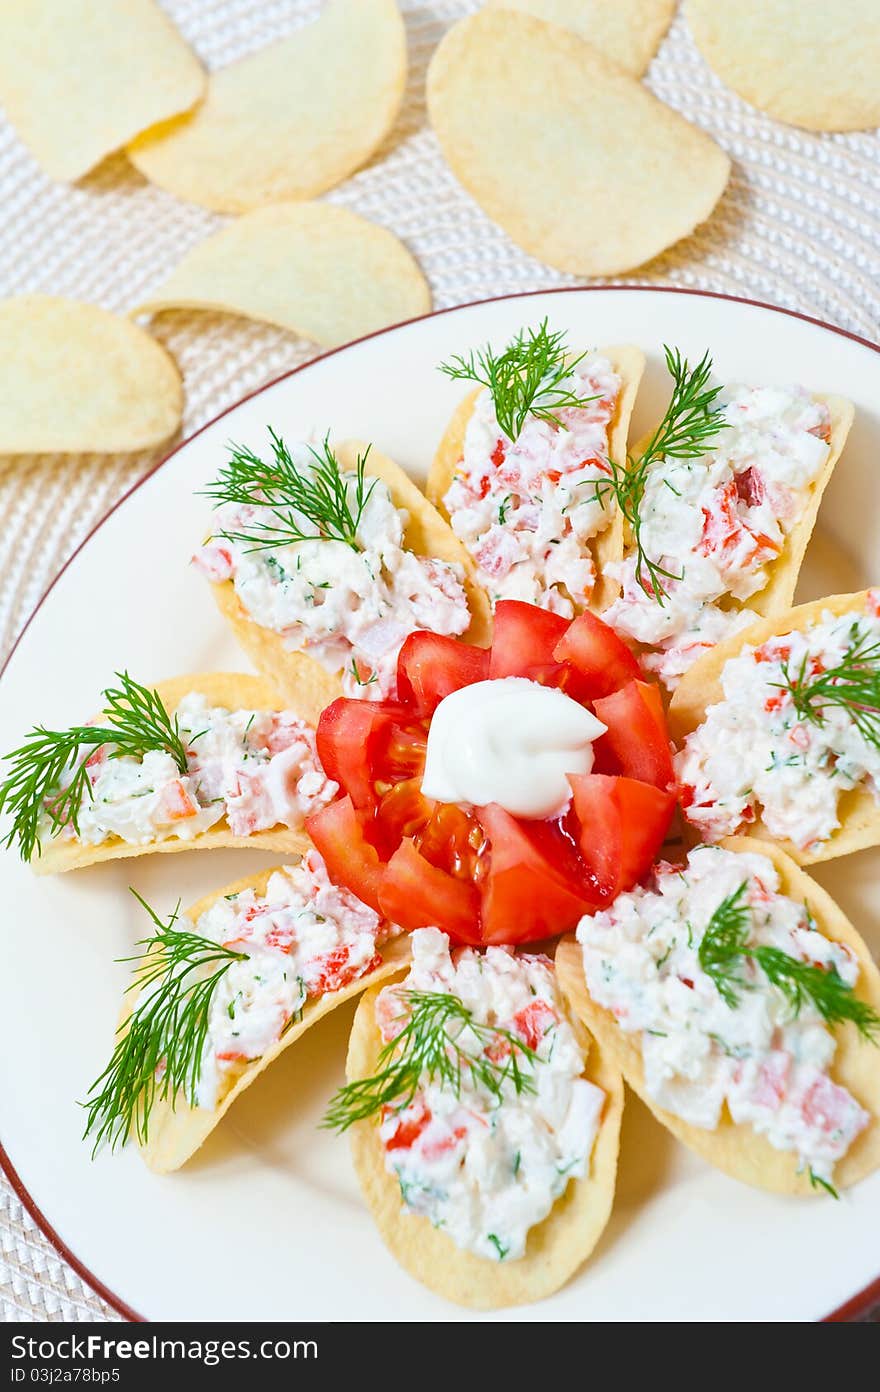 Appetizer on chips with crab meat, Feta cheese and tomato